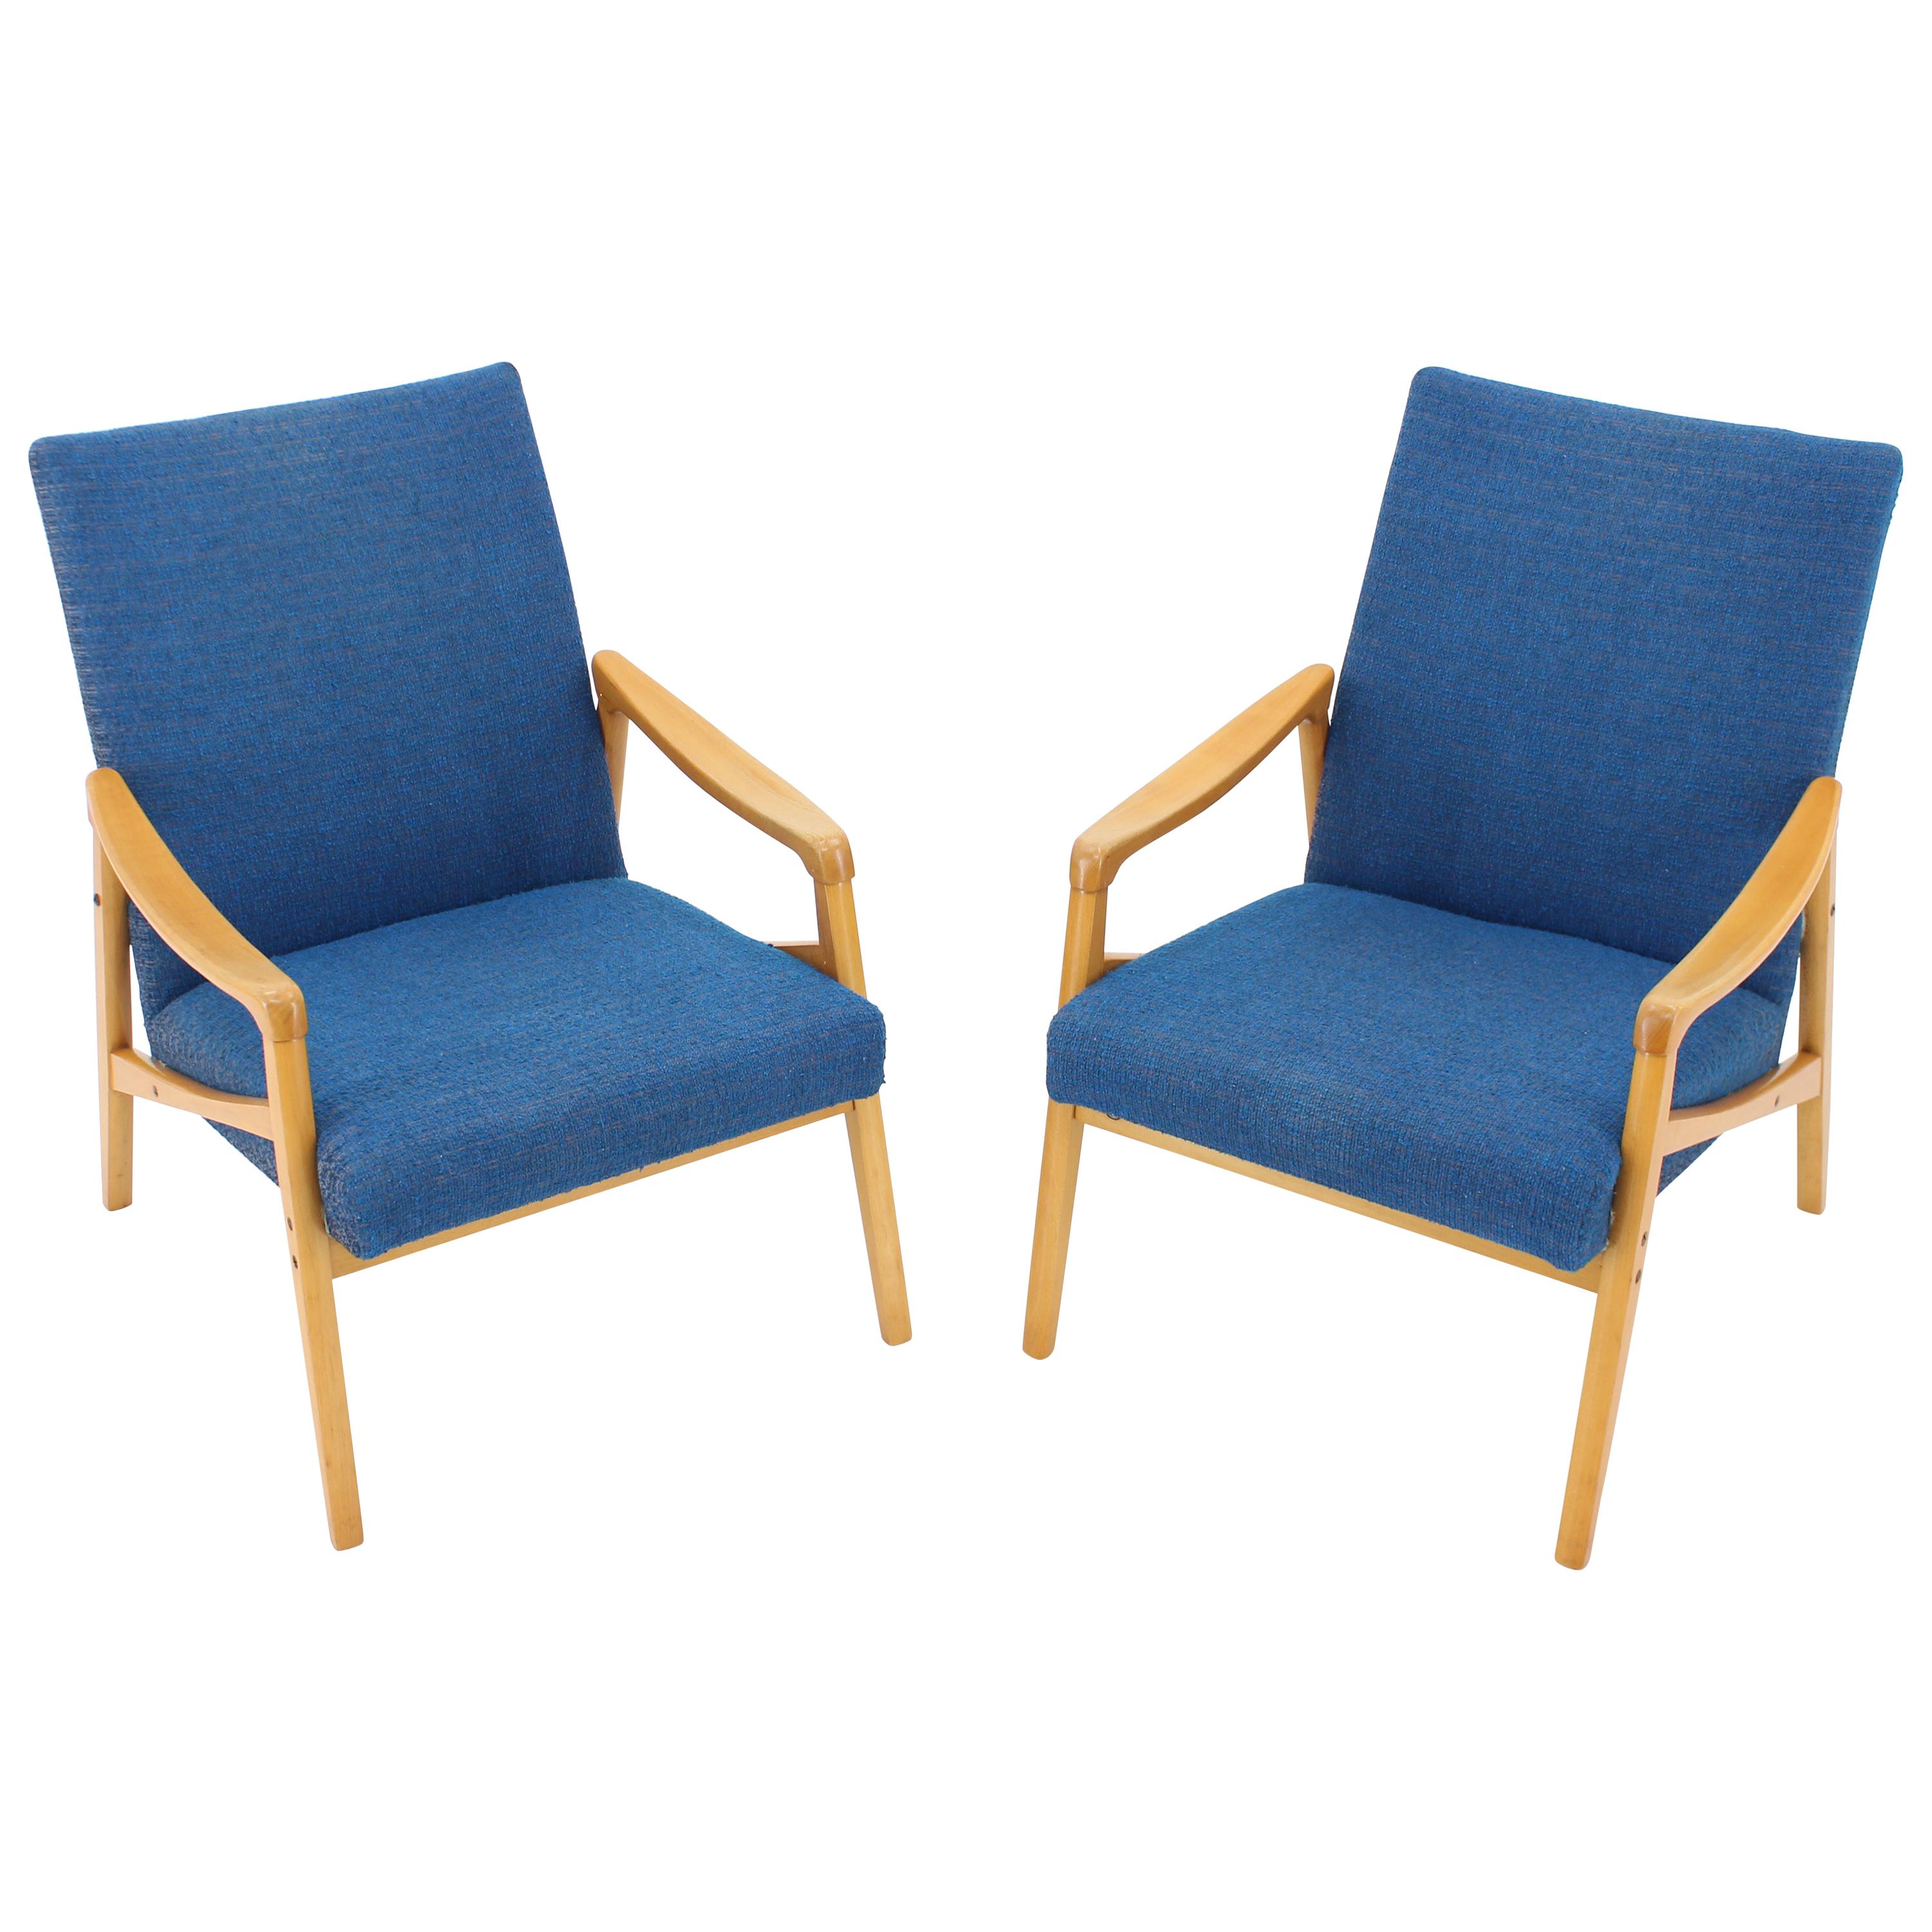 Set of Two Blue Armchairs, 1960s